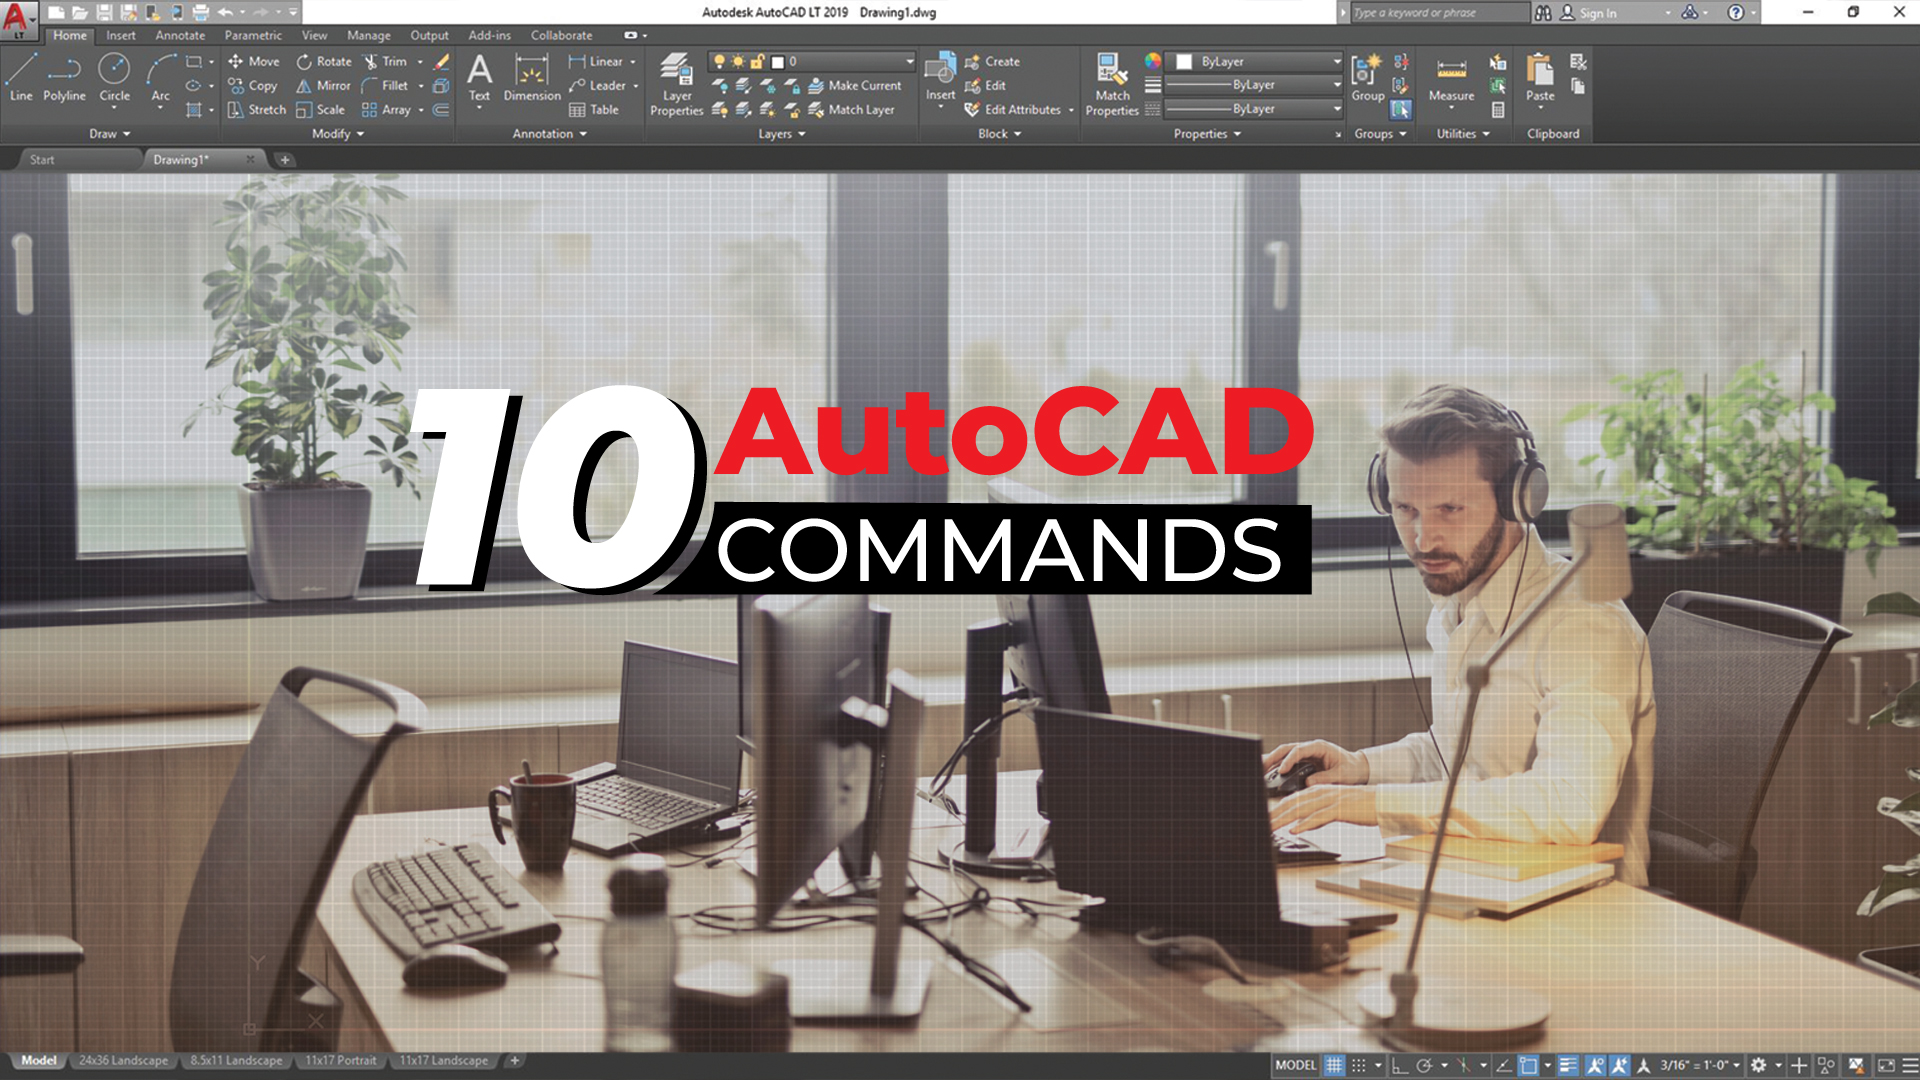 Top 10 AutoCAD Commands to increase work productivity